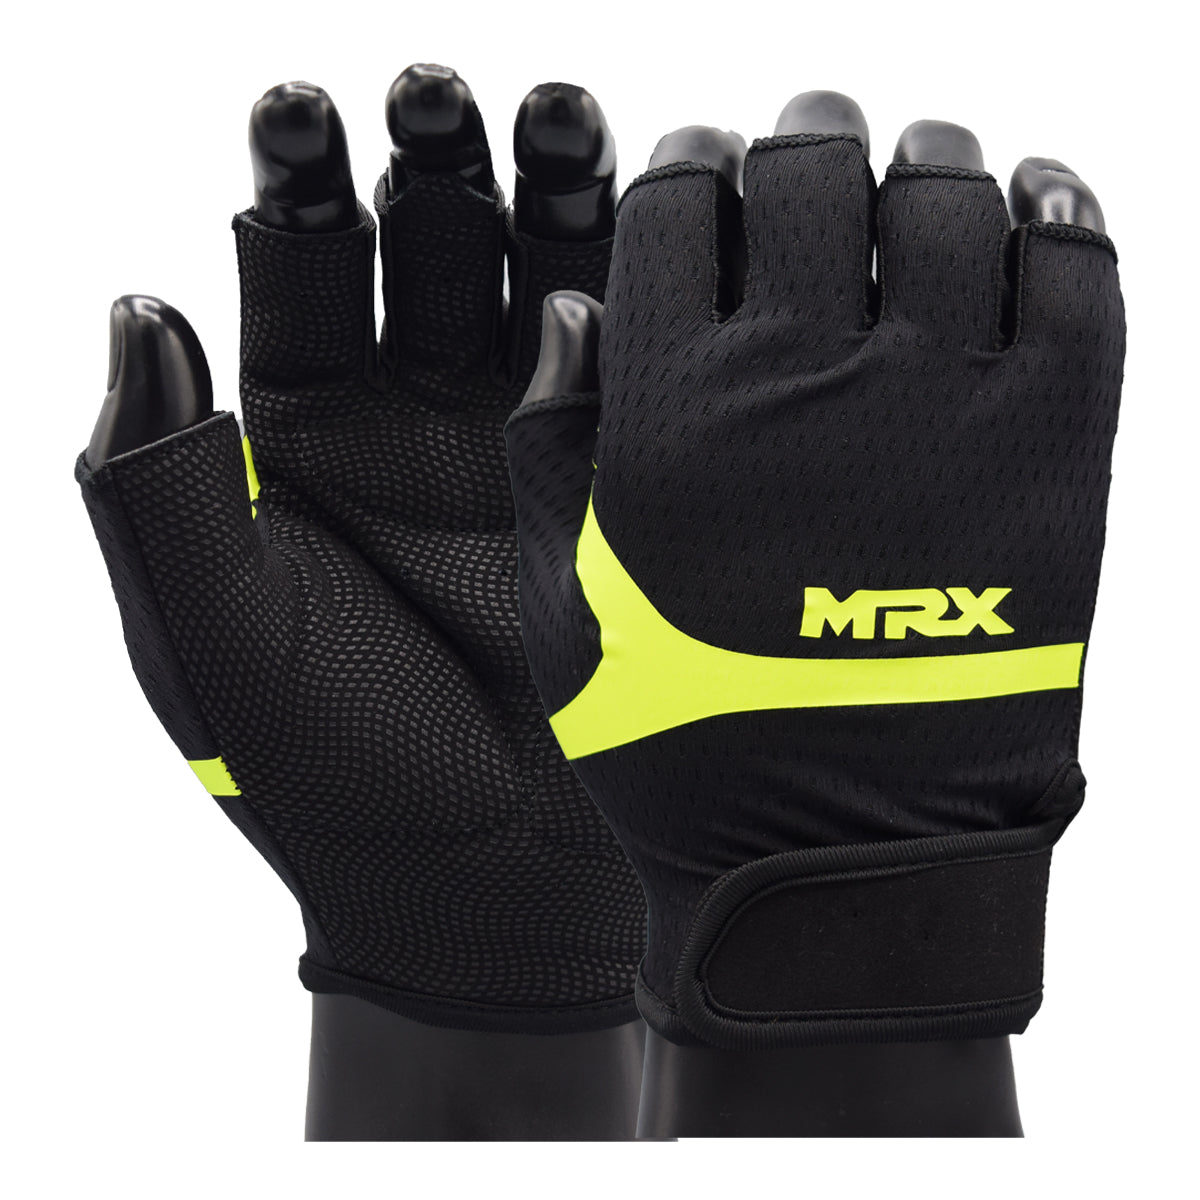 MRX Weight Lifting Gloves for Women Padded Palm Gym Workout Cycling